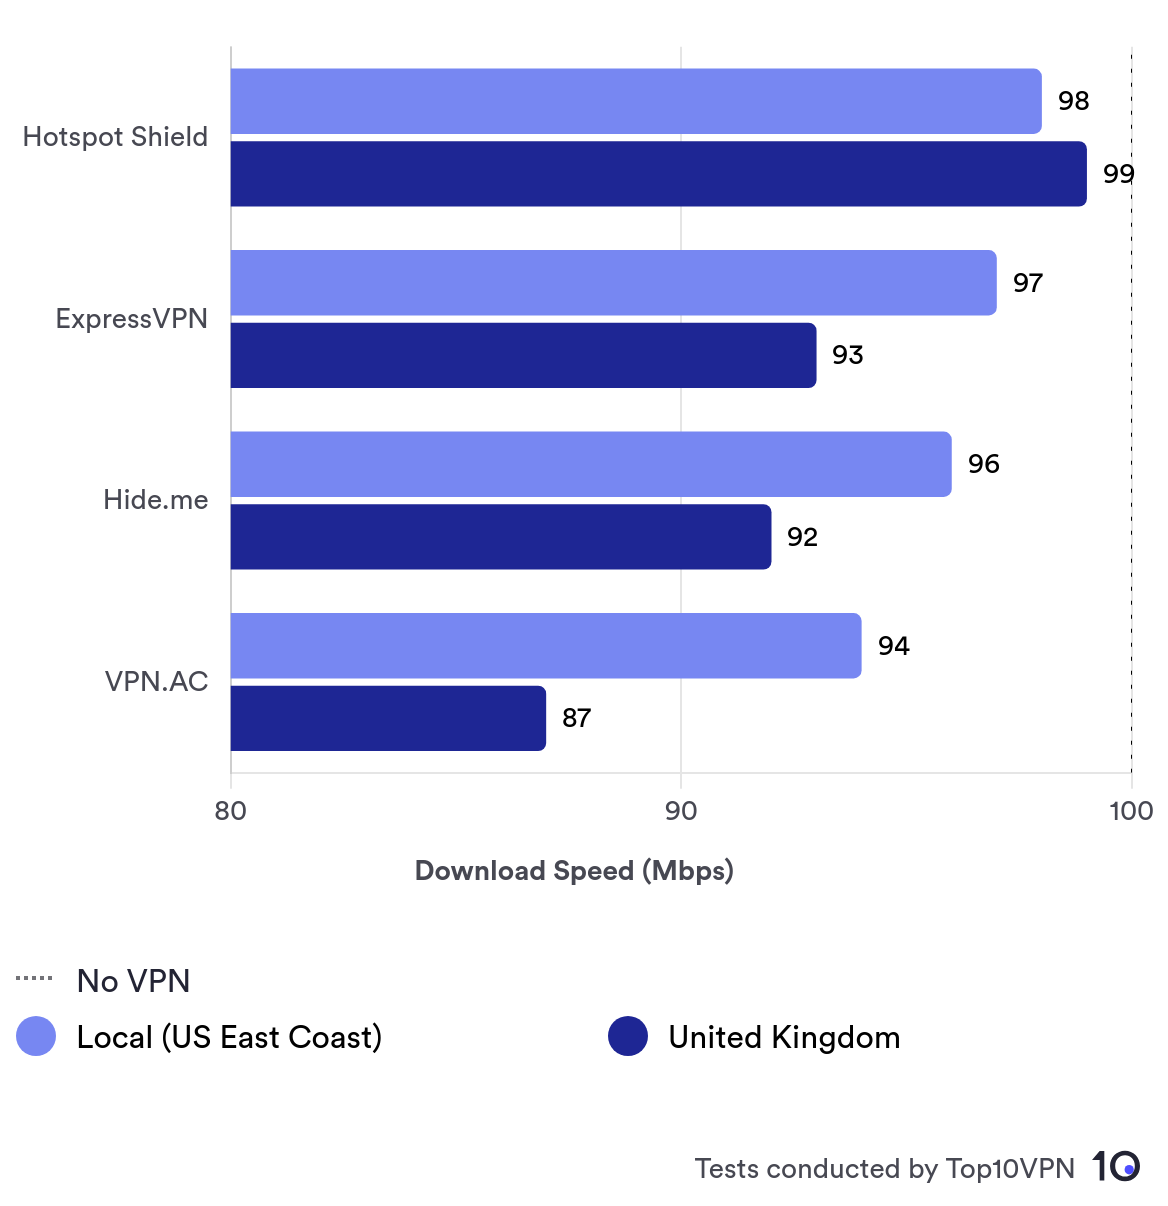 Bar chart comparing the speeds of four top VPNs: Hotspot Shield, ExpressVPN, Hide.me, and VPN.AC. Results show local and international speeds to the UK descending in the order above. 